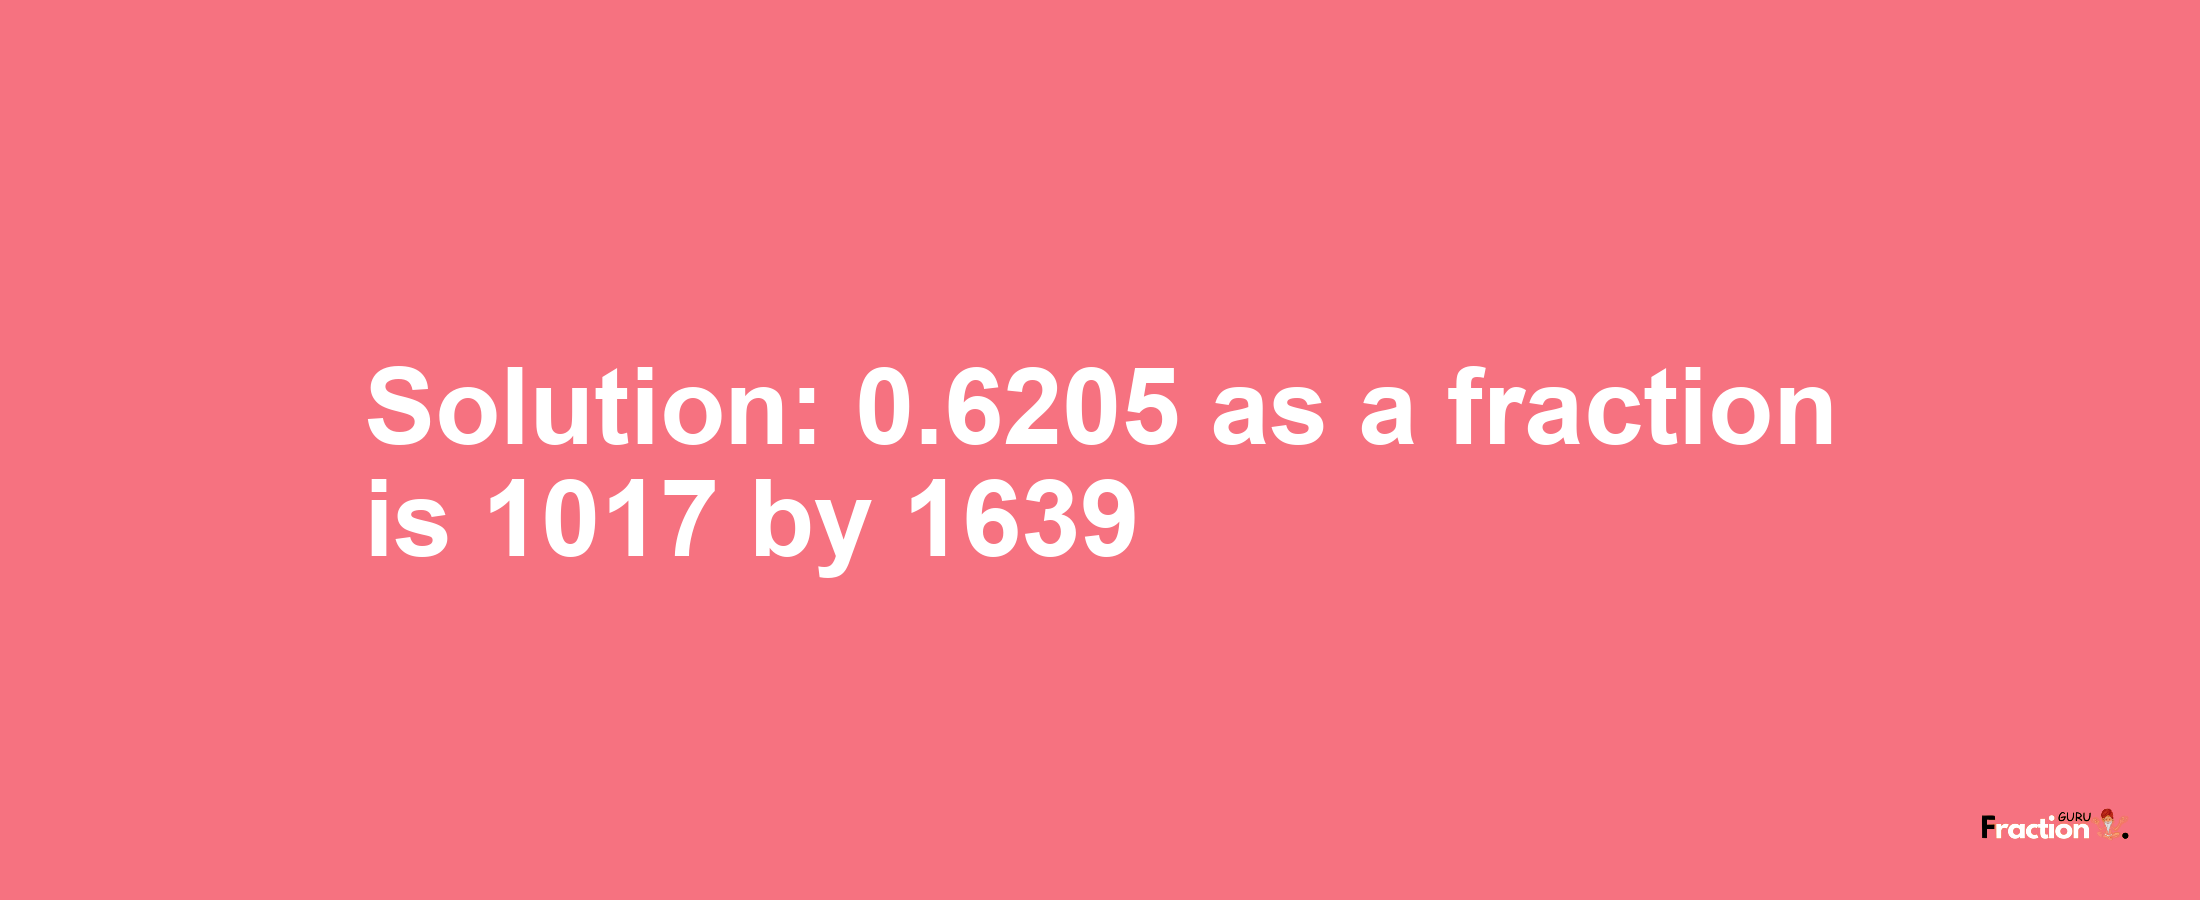 Solution:0.6205 as a fraction is 1017/1639